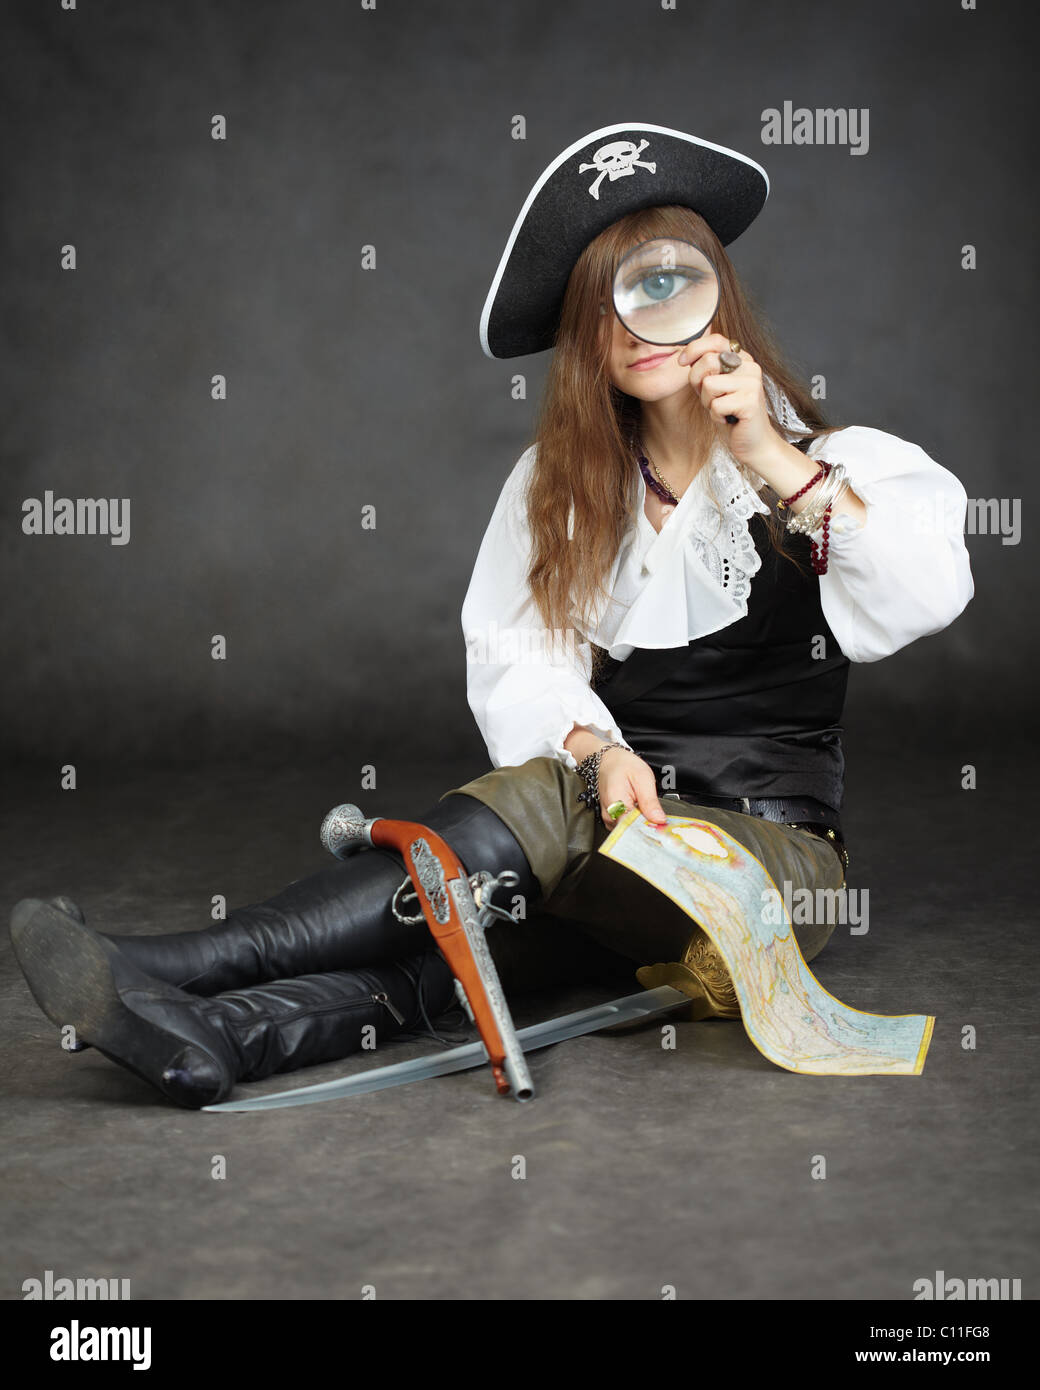 Girl pirate, and map with a magnifying glass on black background Stock Photo